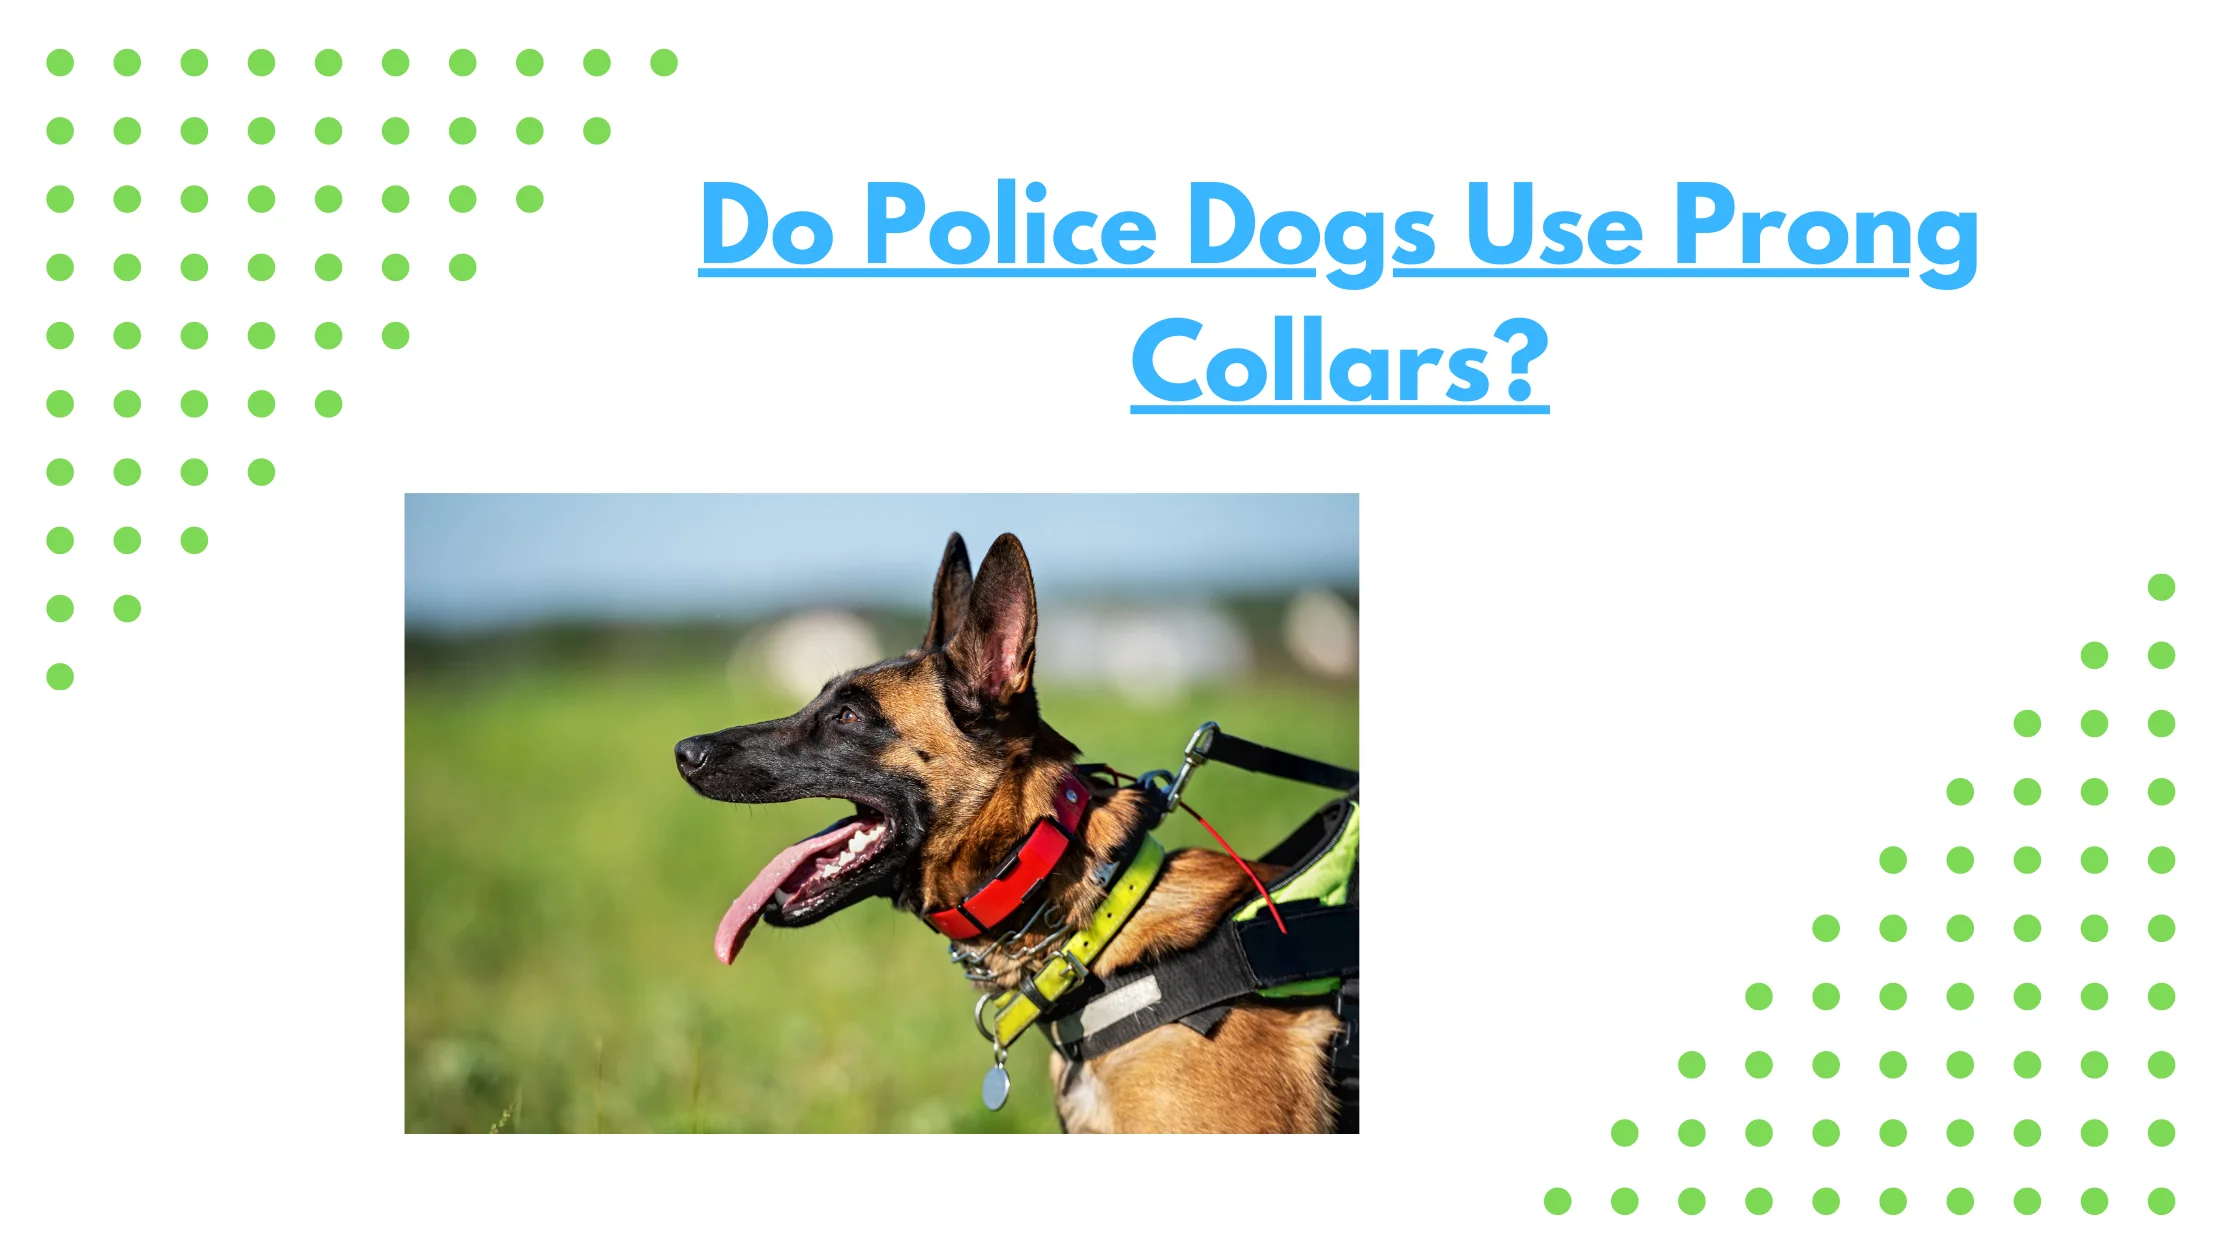 Do Police Dogs Use Prong Collars